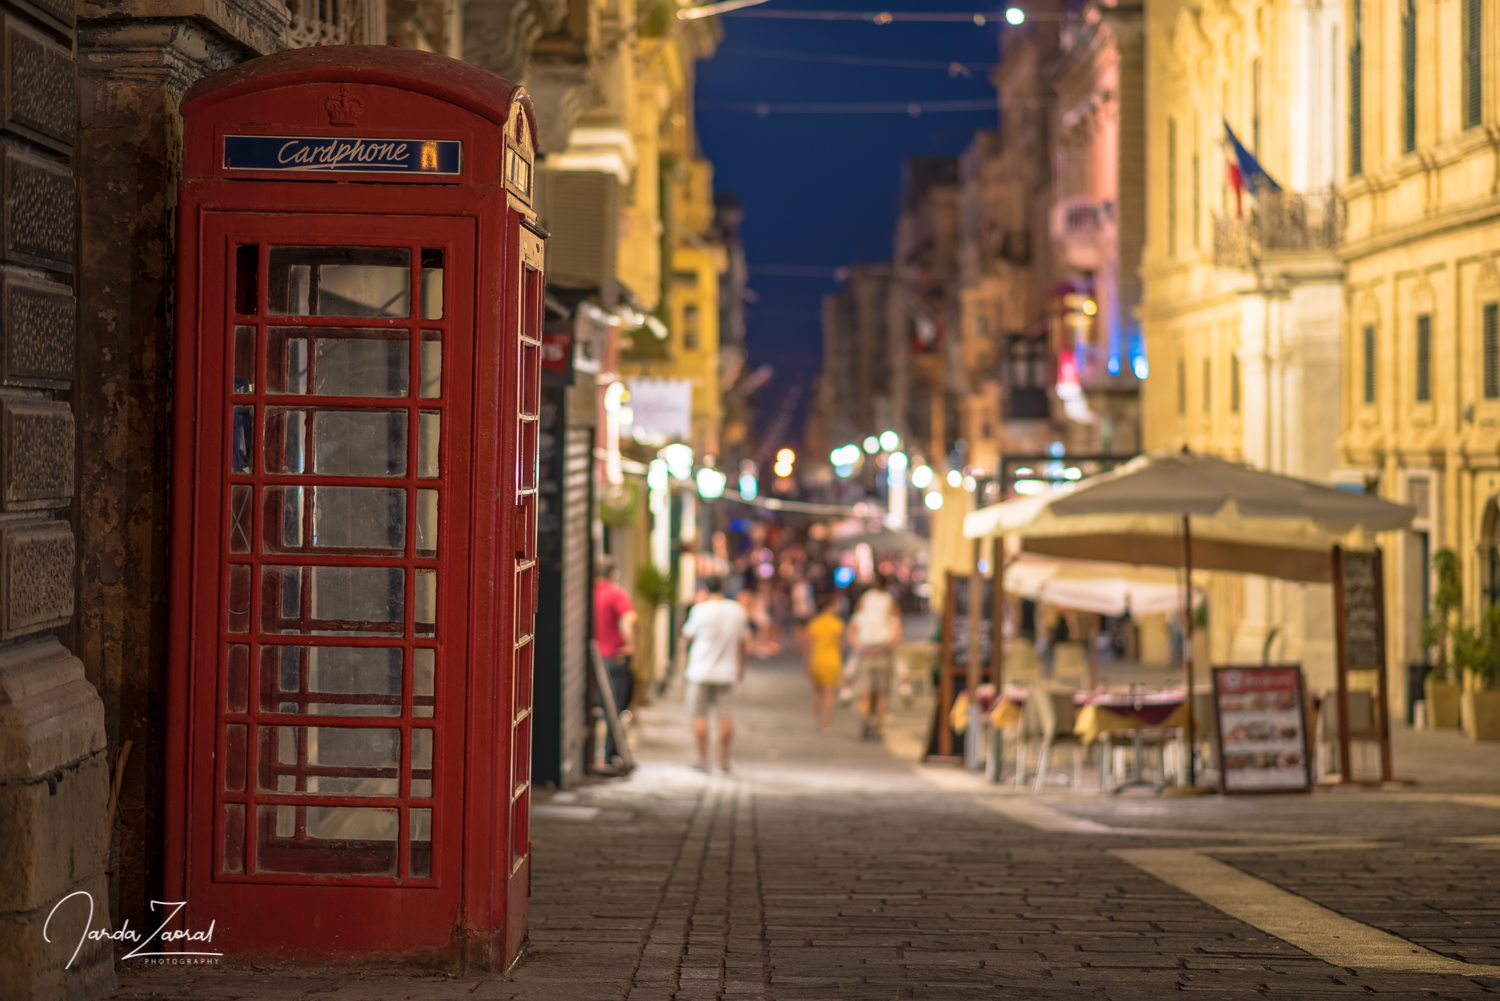 Telephone booth in Valletta at night